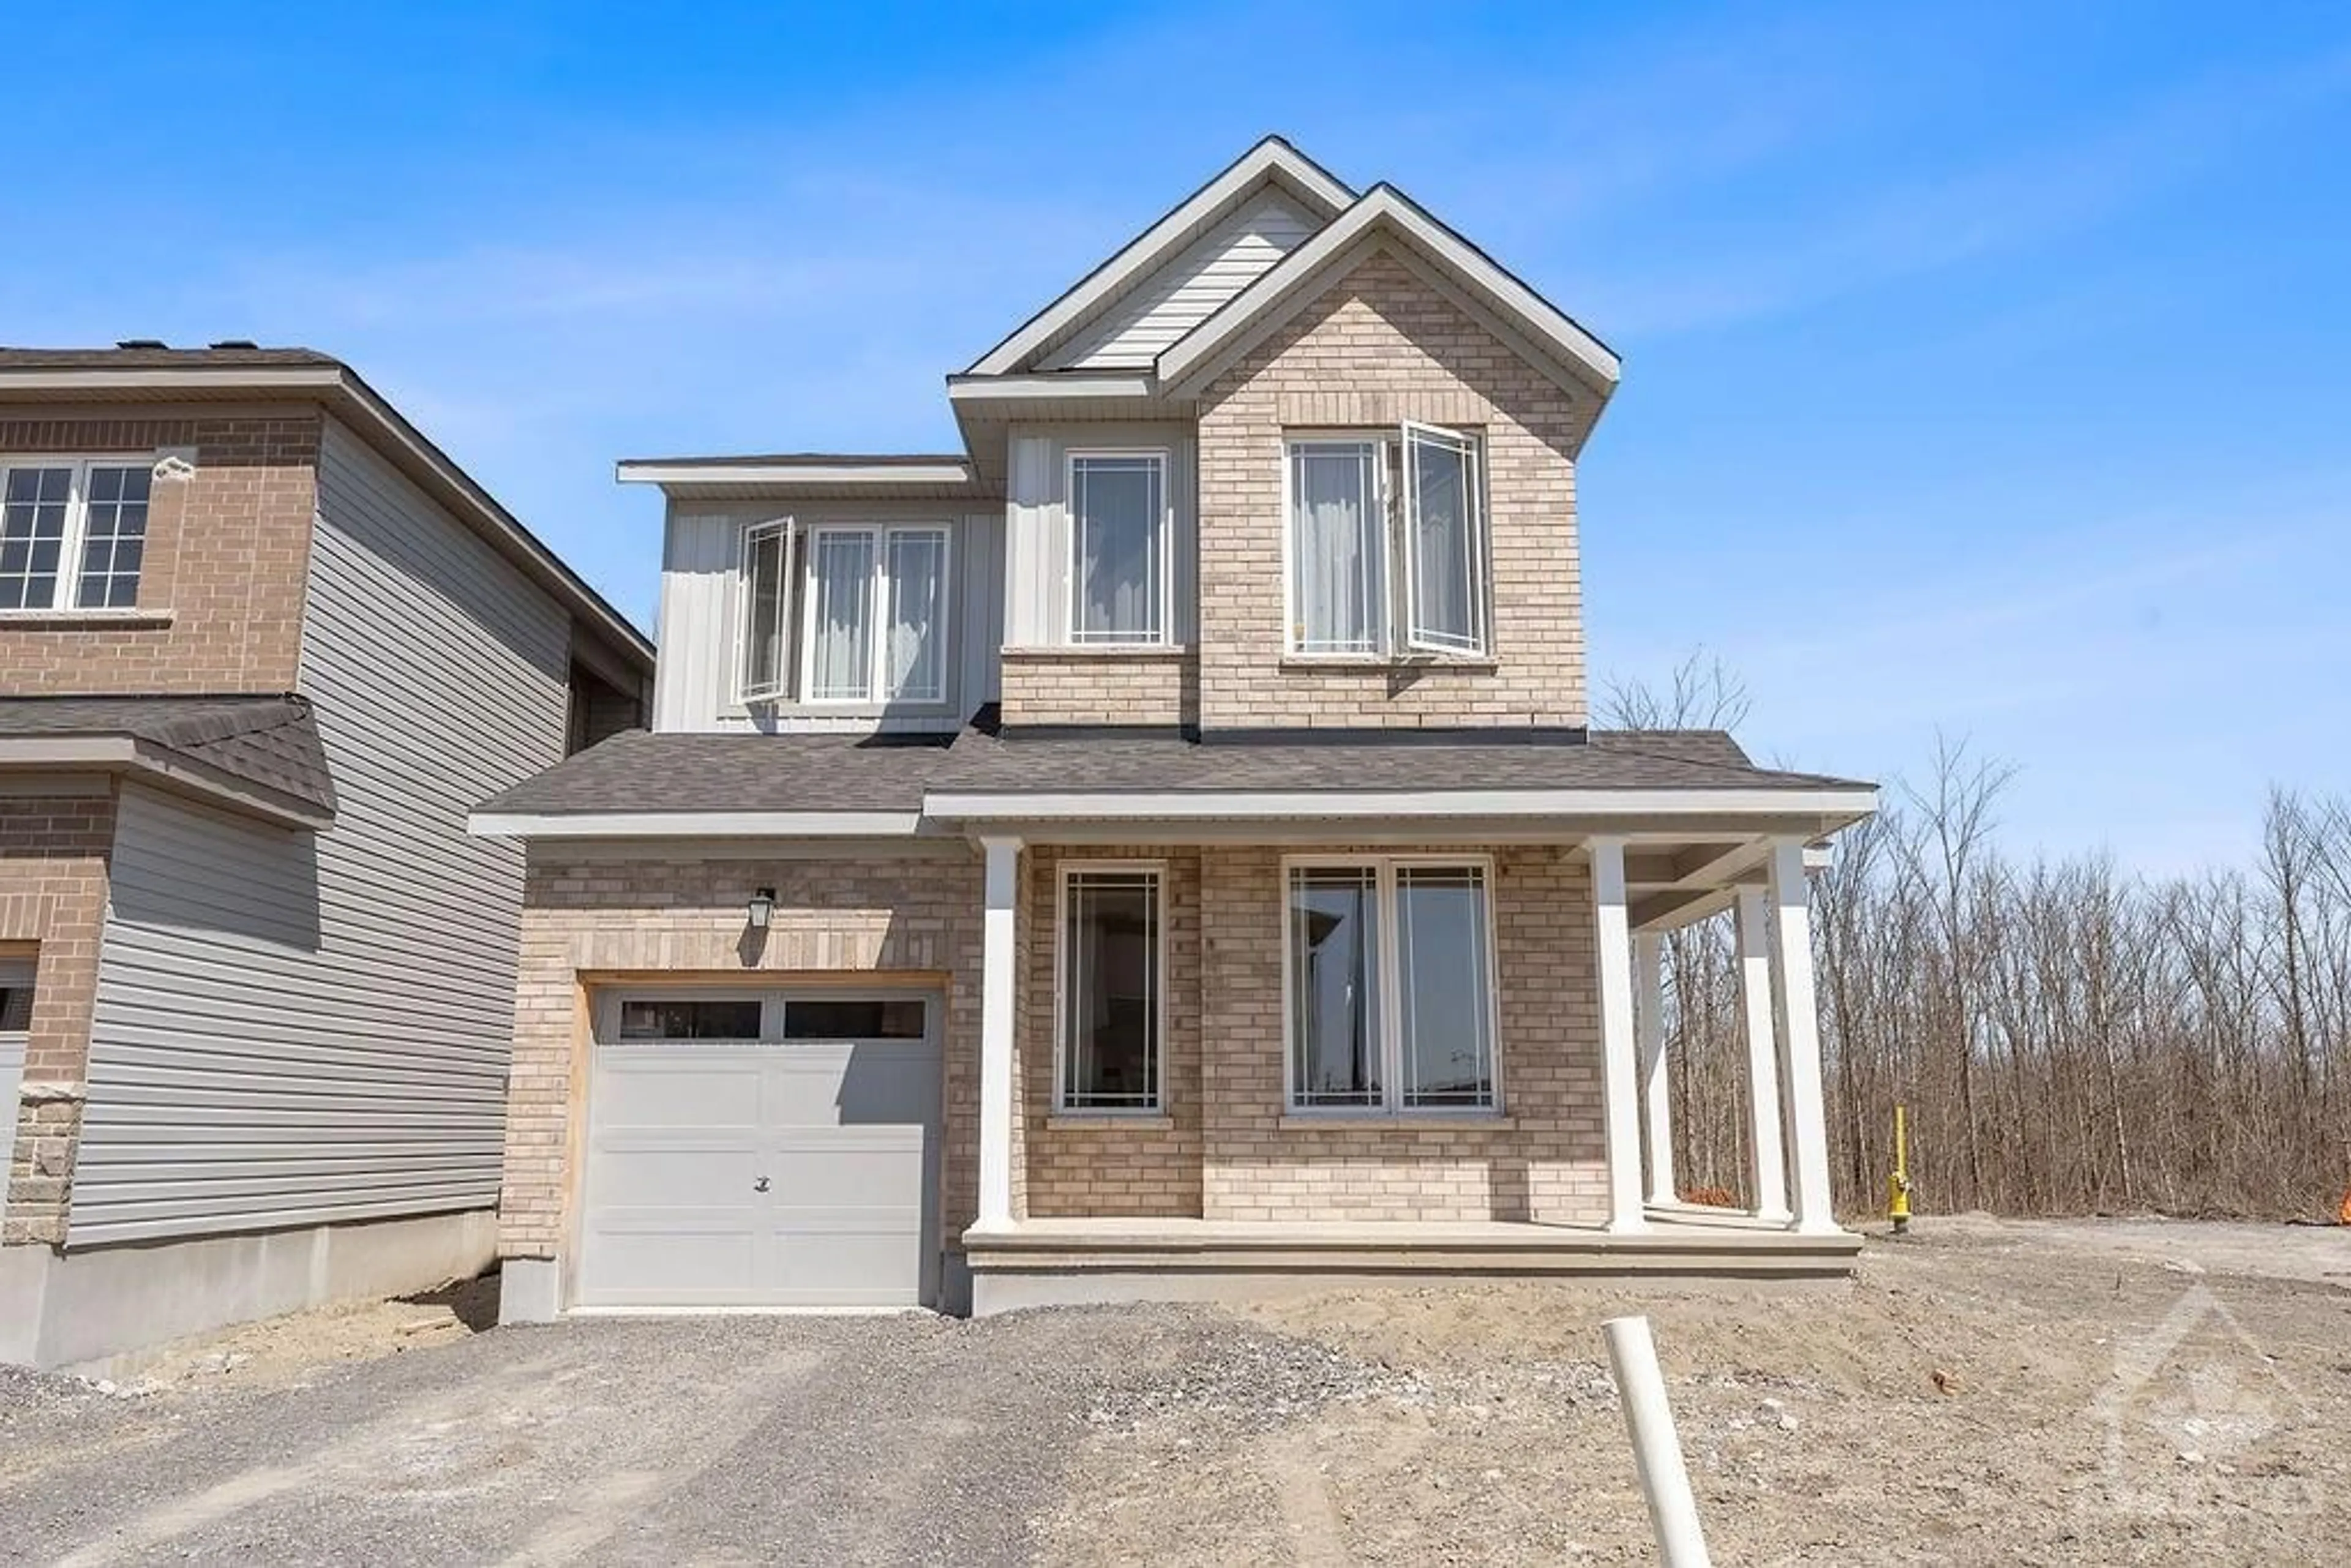 Home with brick exterior material for 655 PERSIMMON Way, Ottawa Ontario K1W 0T2